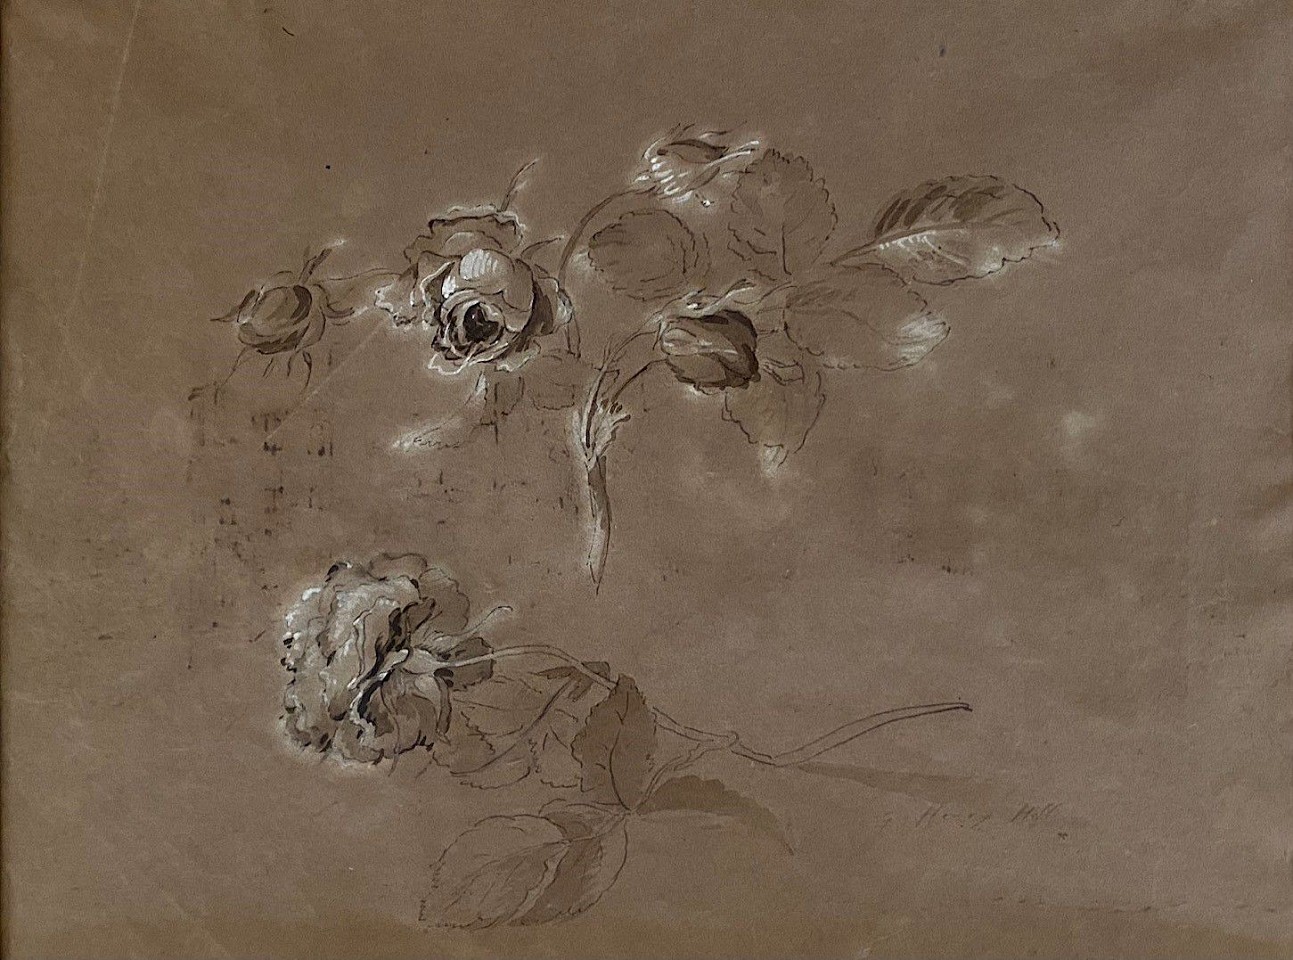 George Henry Hall, Roses
ink and gouache on brown paper, 8 1/2"" x 11"" sight size
JWC 04/11.01
$2,800